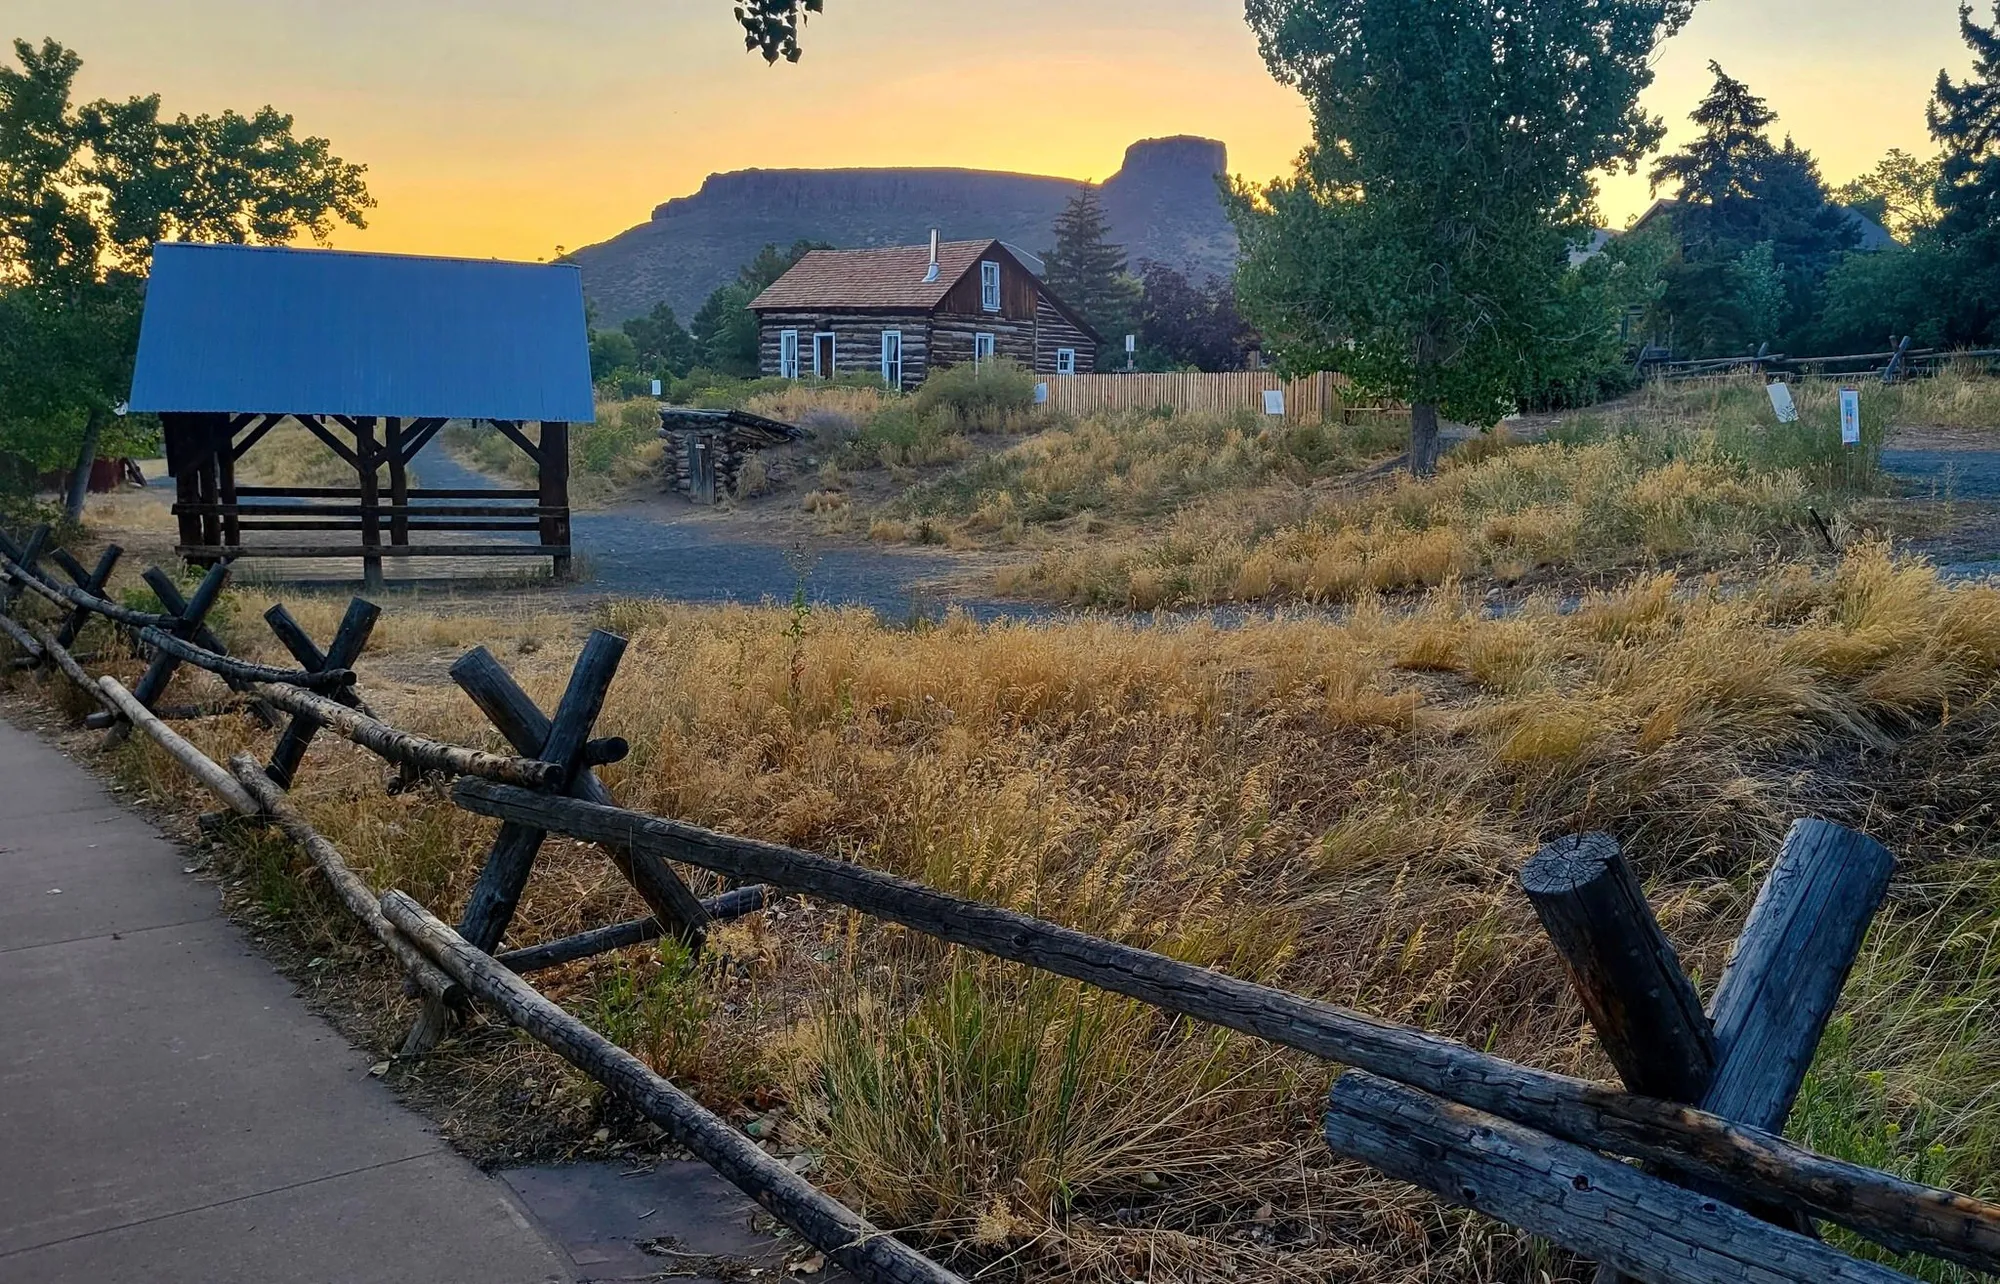 looking over the split rail fence at grass, a hay barn, a cabin, and castle rock in the background